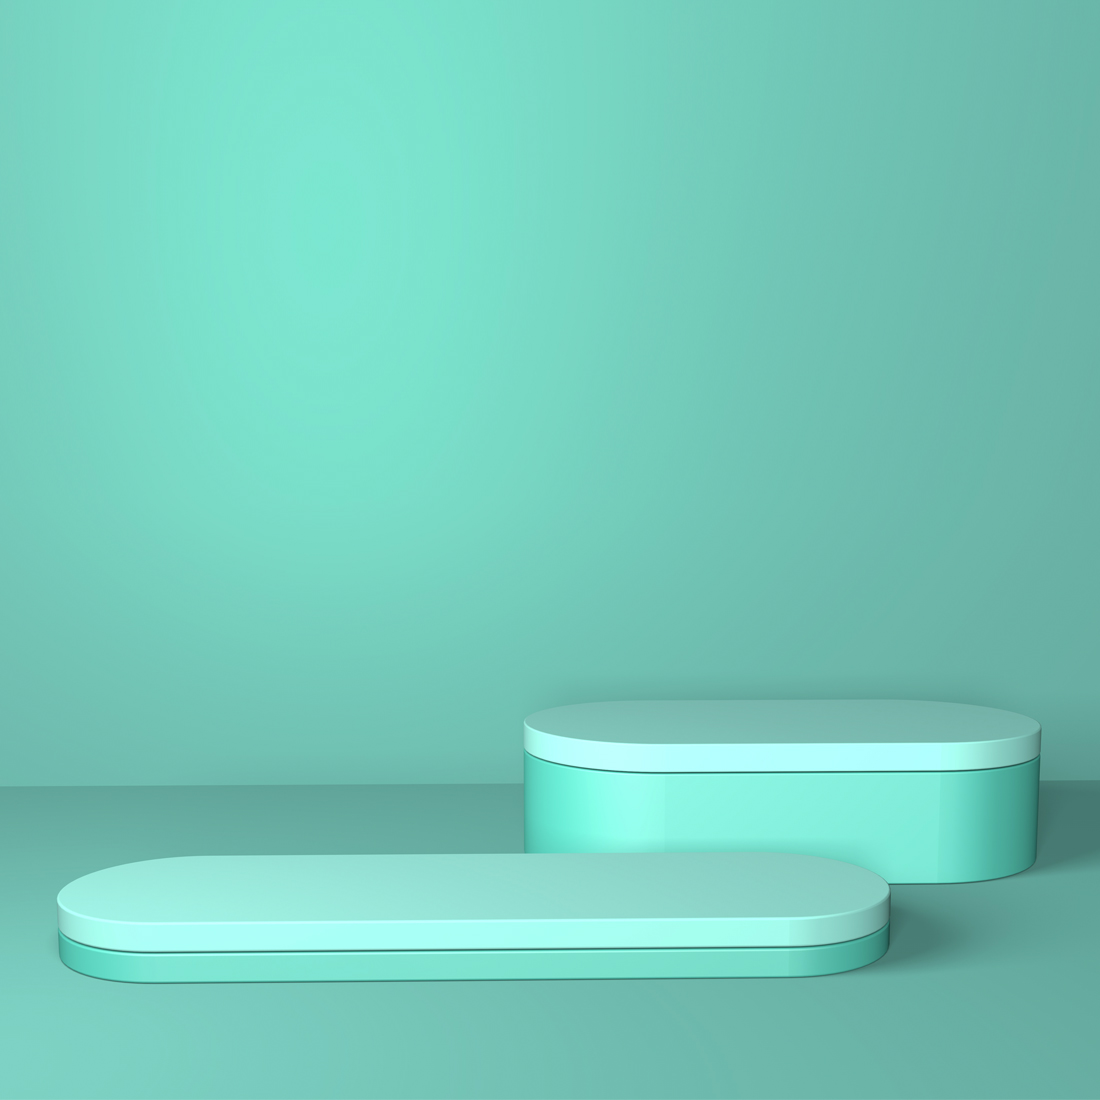 Turquoise Podium Abstract high quality 3d concept illuminated pedestal preview image.